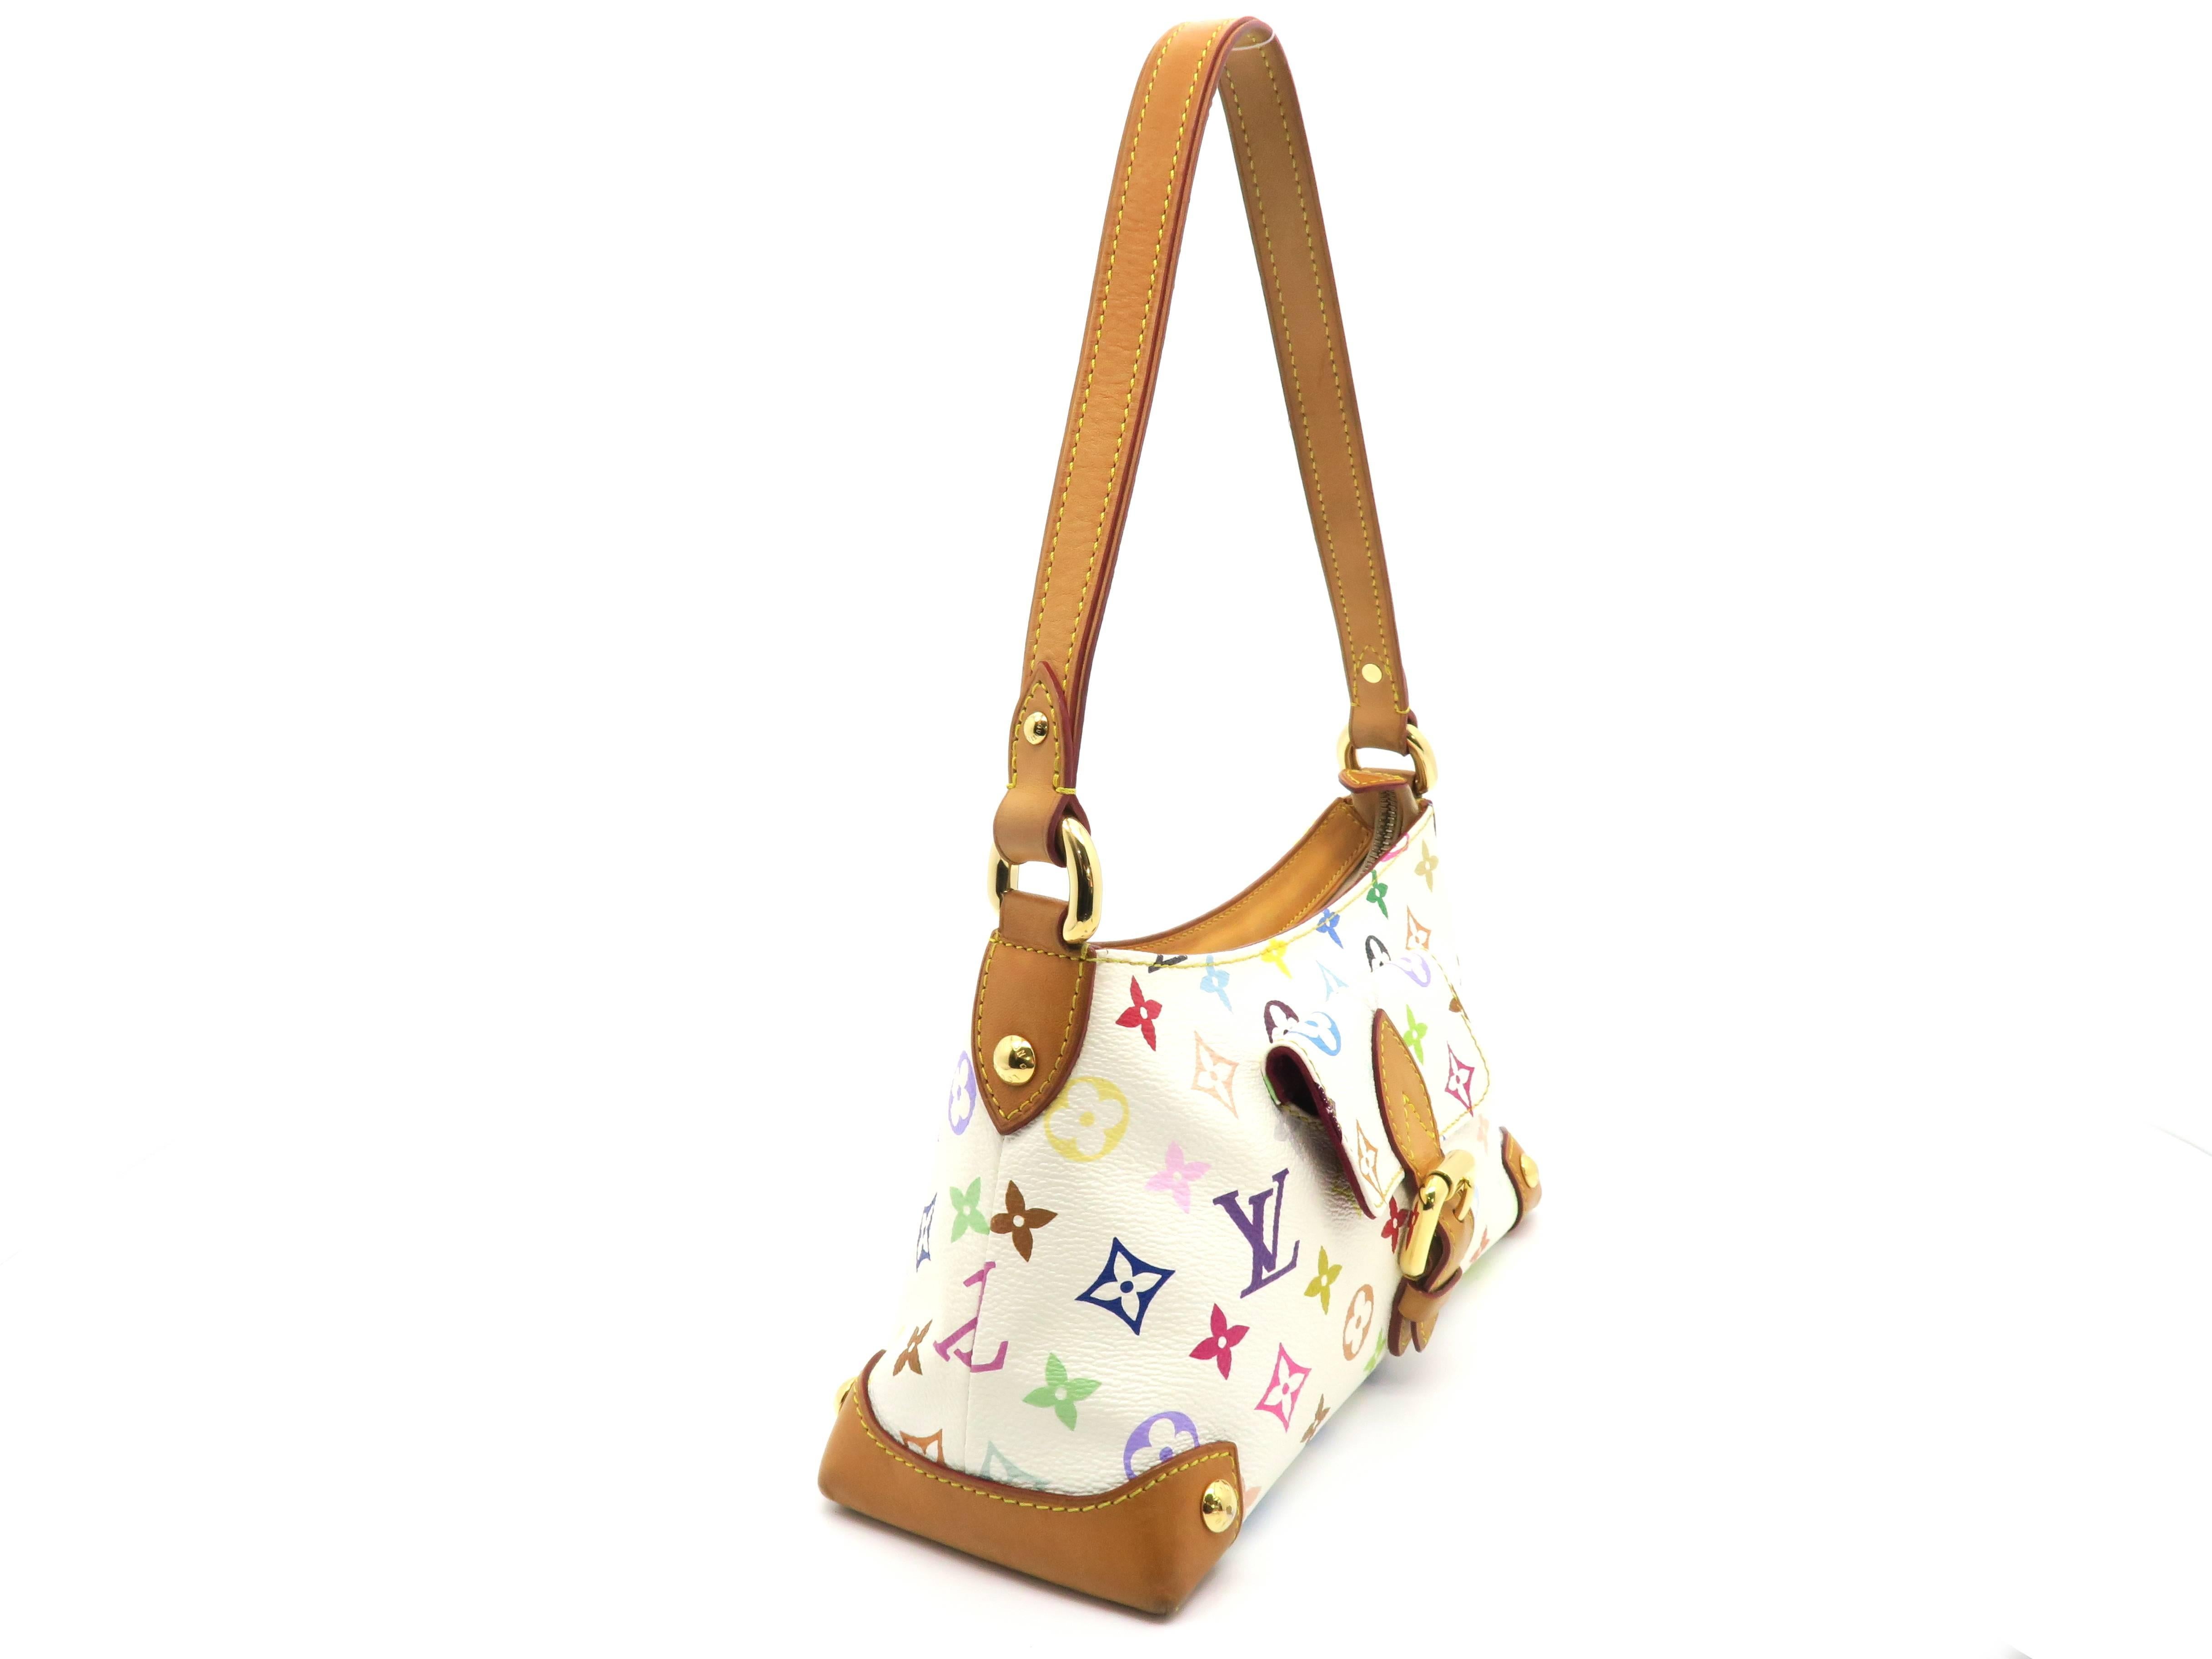 Color: White

Material: Monogram Canvas Multicolore

Condition: Rank A 
Overall: Good, few minor defects
Surface: Minor Scratches
Corners: Minor Scratches
Edges: Minor Scratches
Handles/Straps: Minor Scratches
Hardware: Minor Scratches

Dimension: